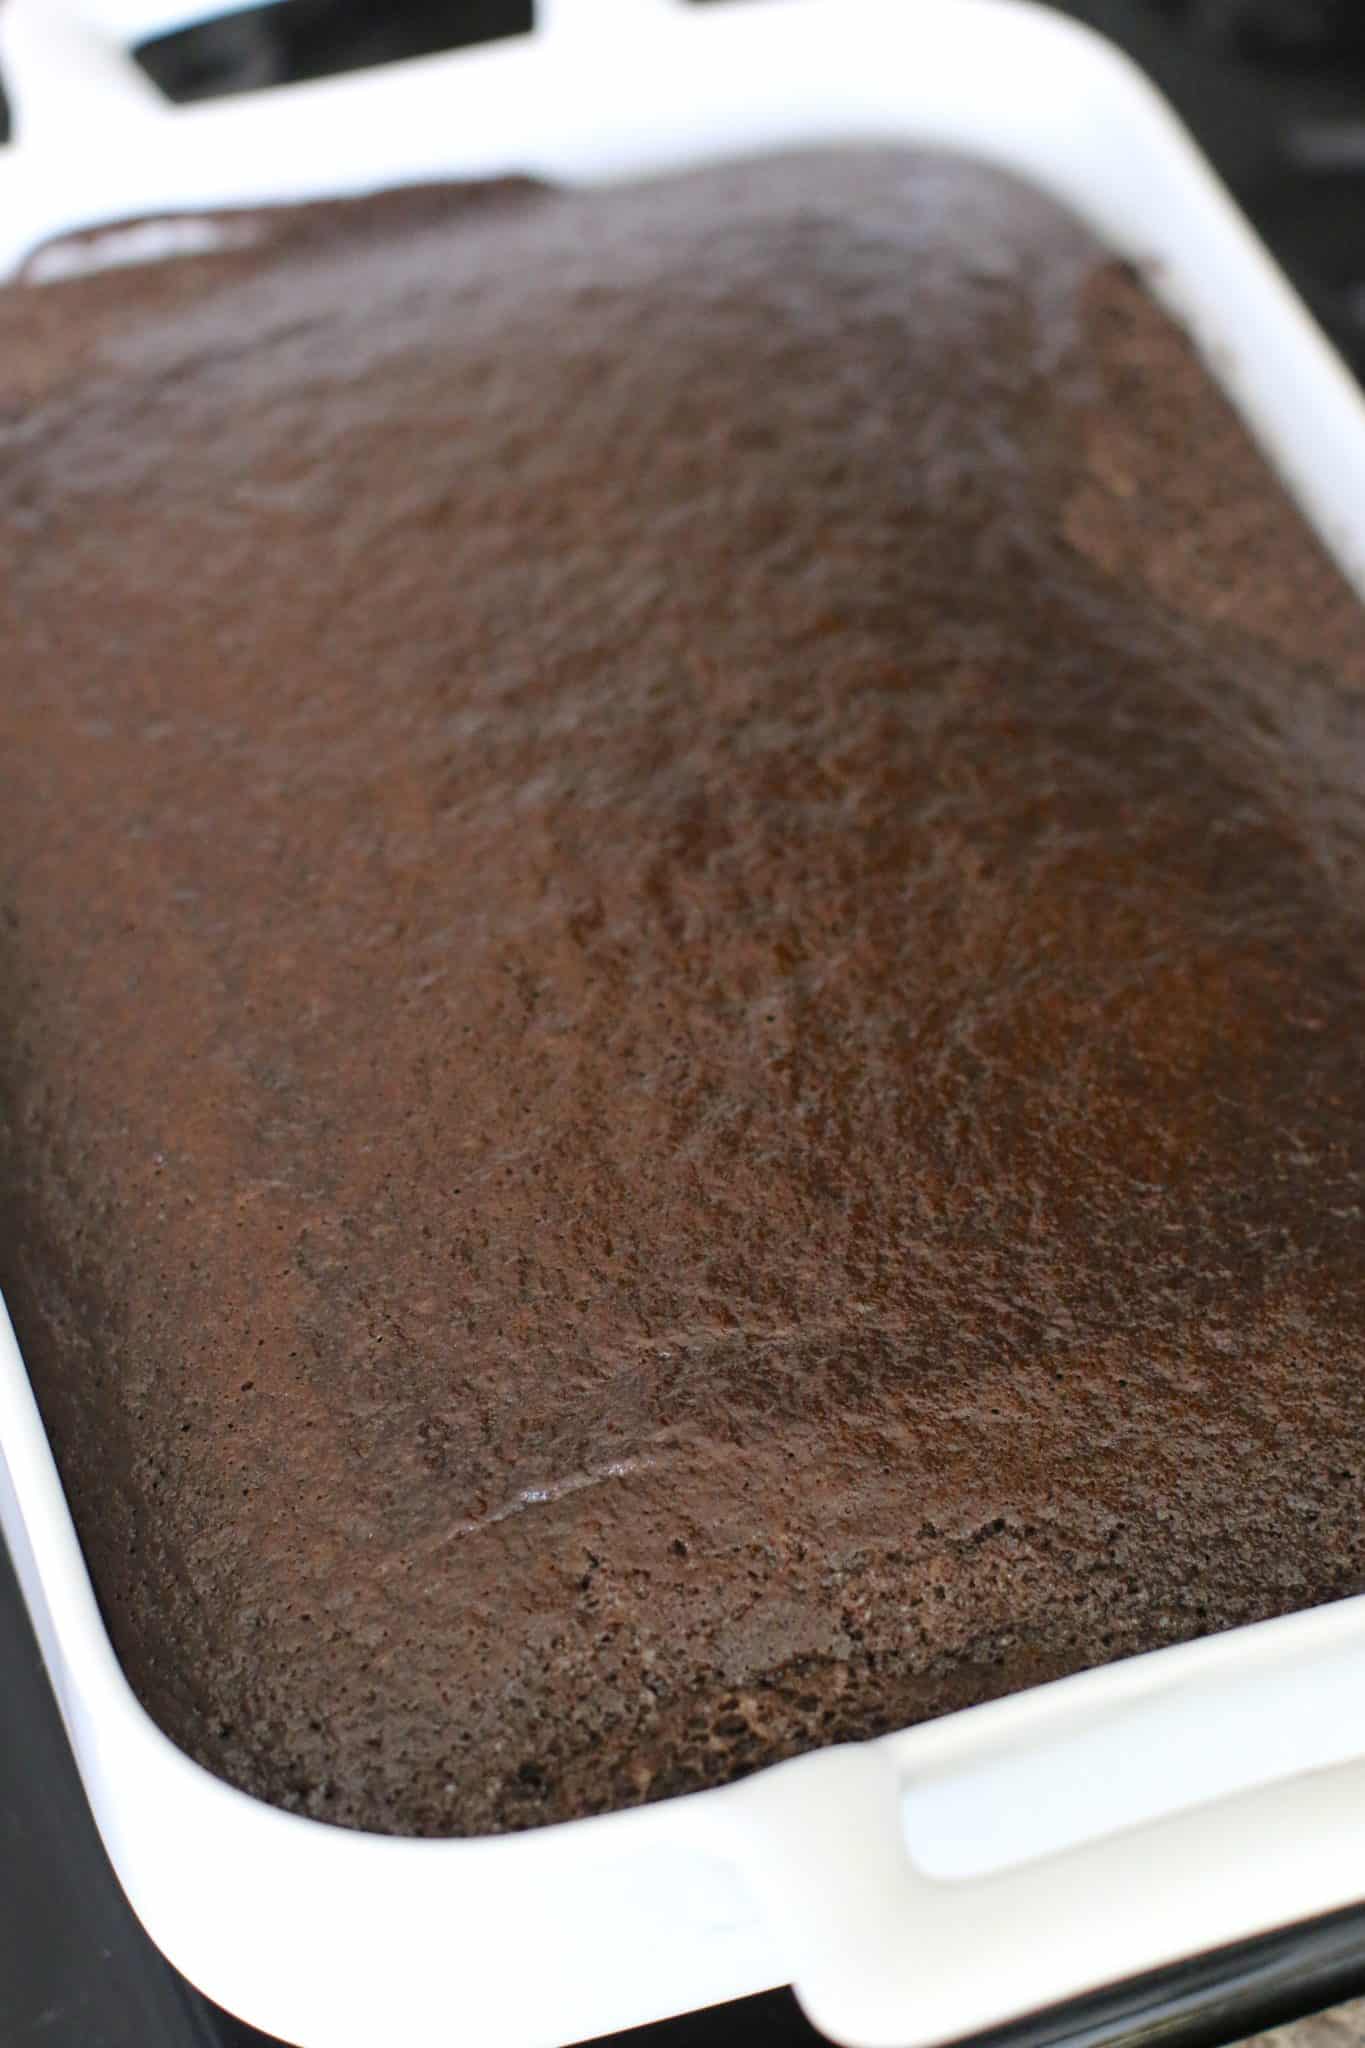 fully baked chocolate cake shown in a white rectangle baking dish with handles.